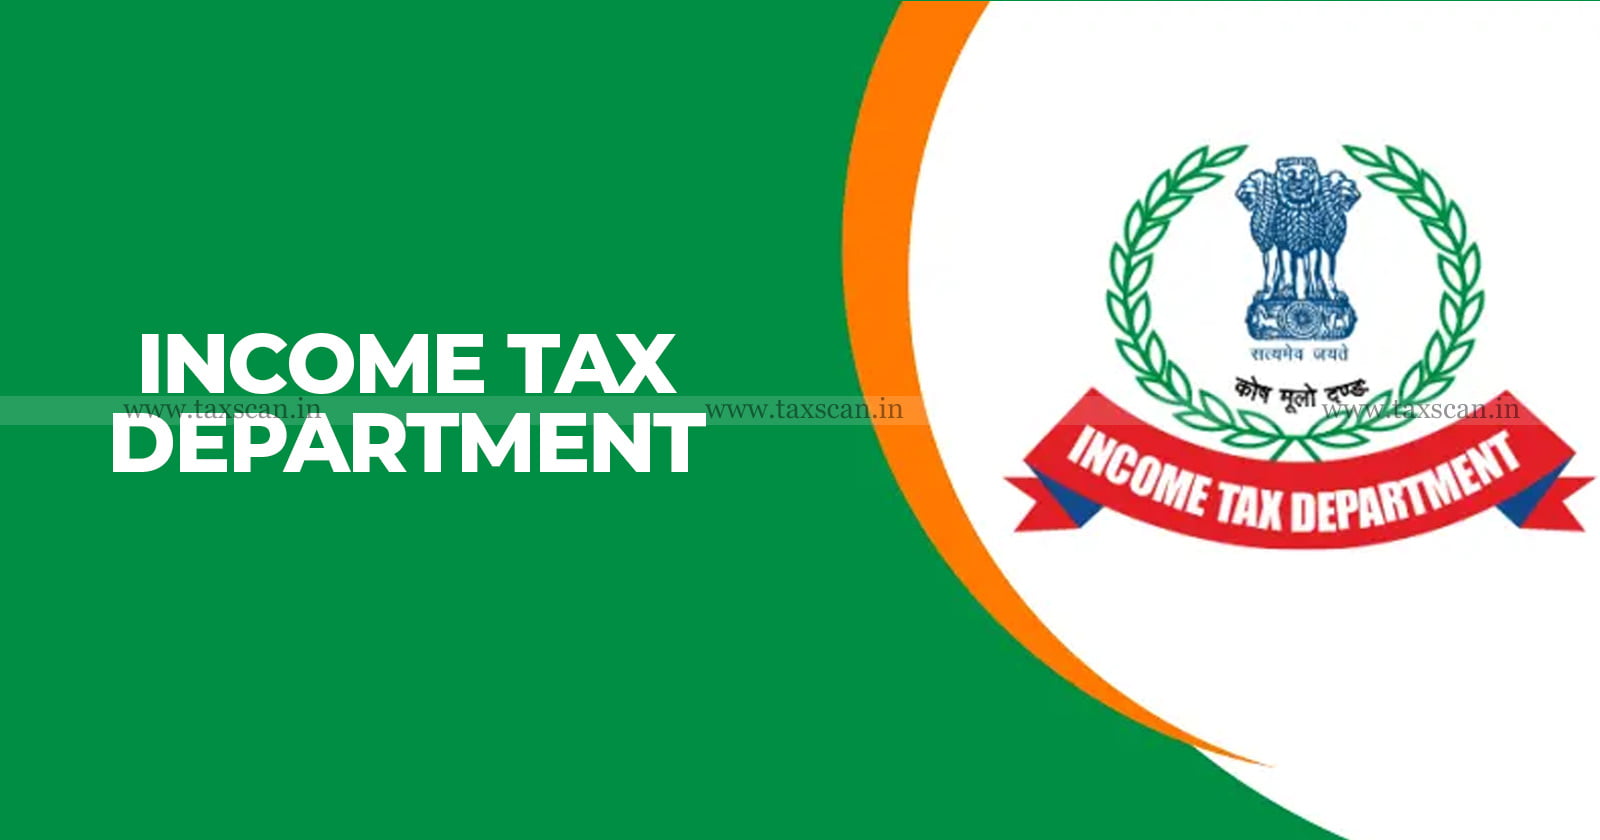 Income Tax Department - Data Analytics - Data Analytics and Advanced Technology - ITR - Income Tax Department uses Data Analytics and Advanced Technology - taxscan